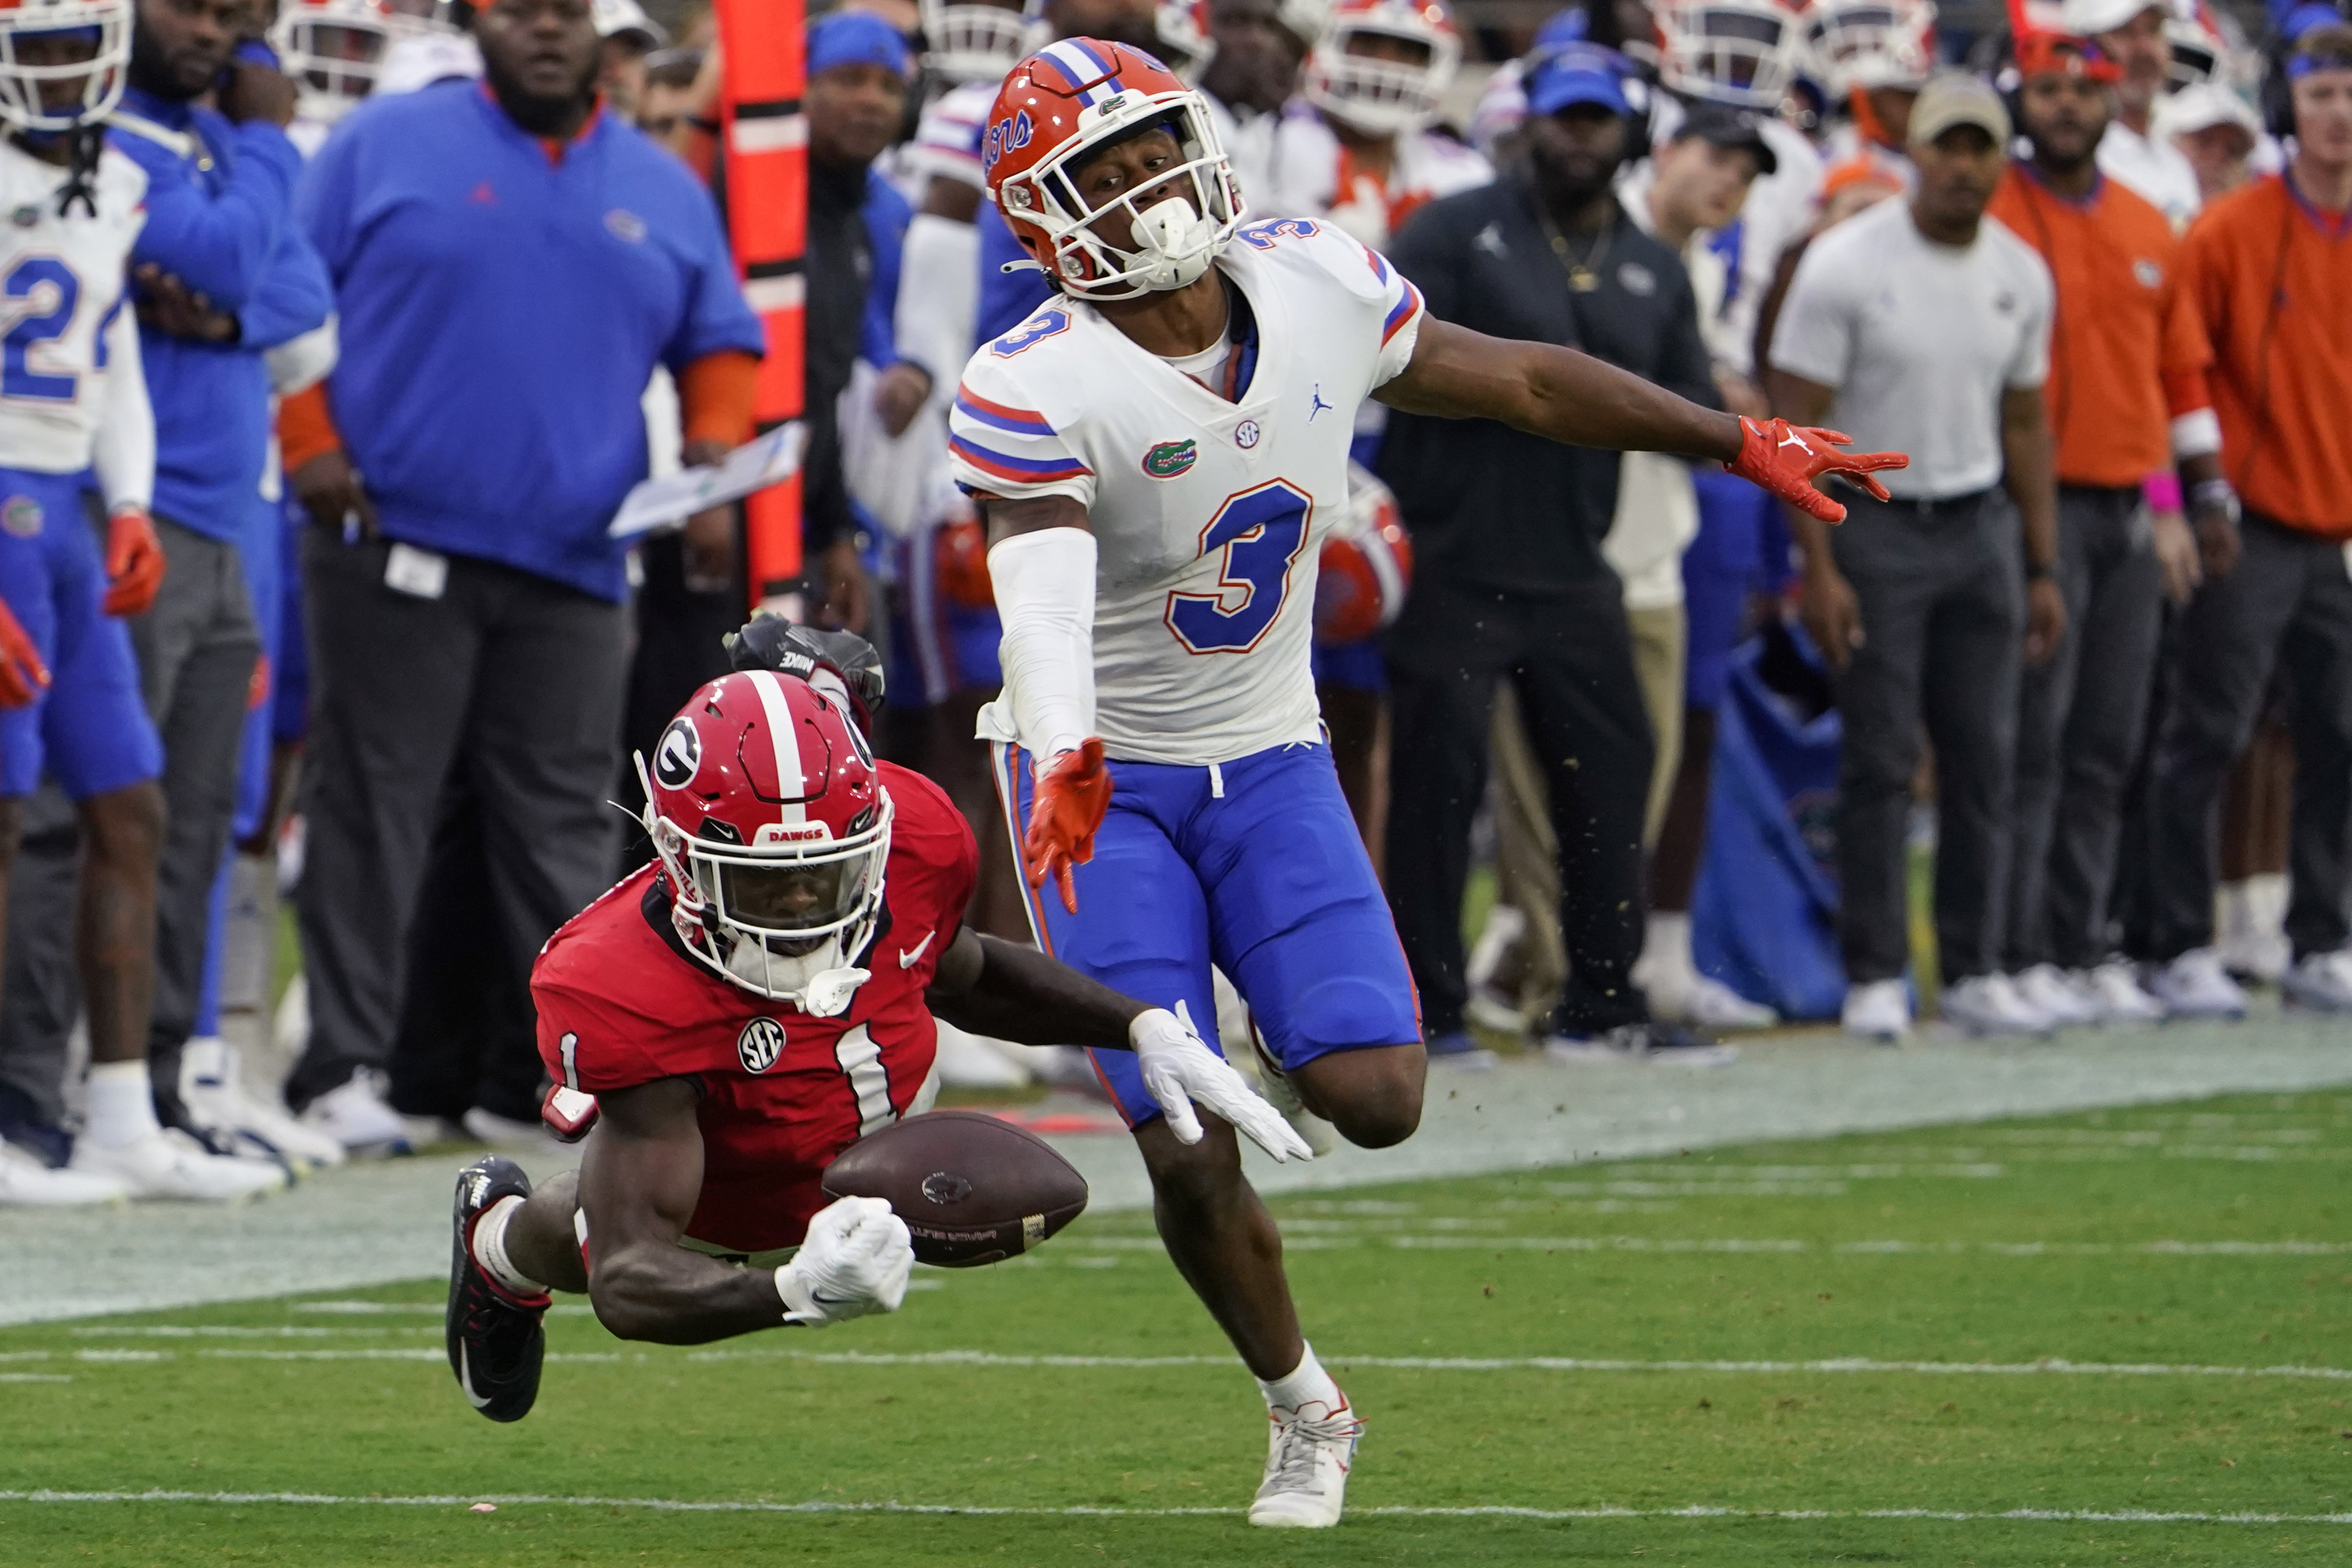 Florida Football: 3 Reasons for Optimism About the Gators in 2022 